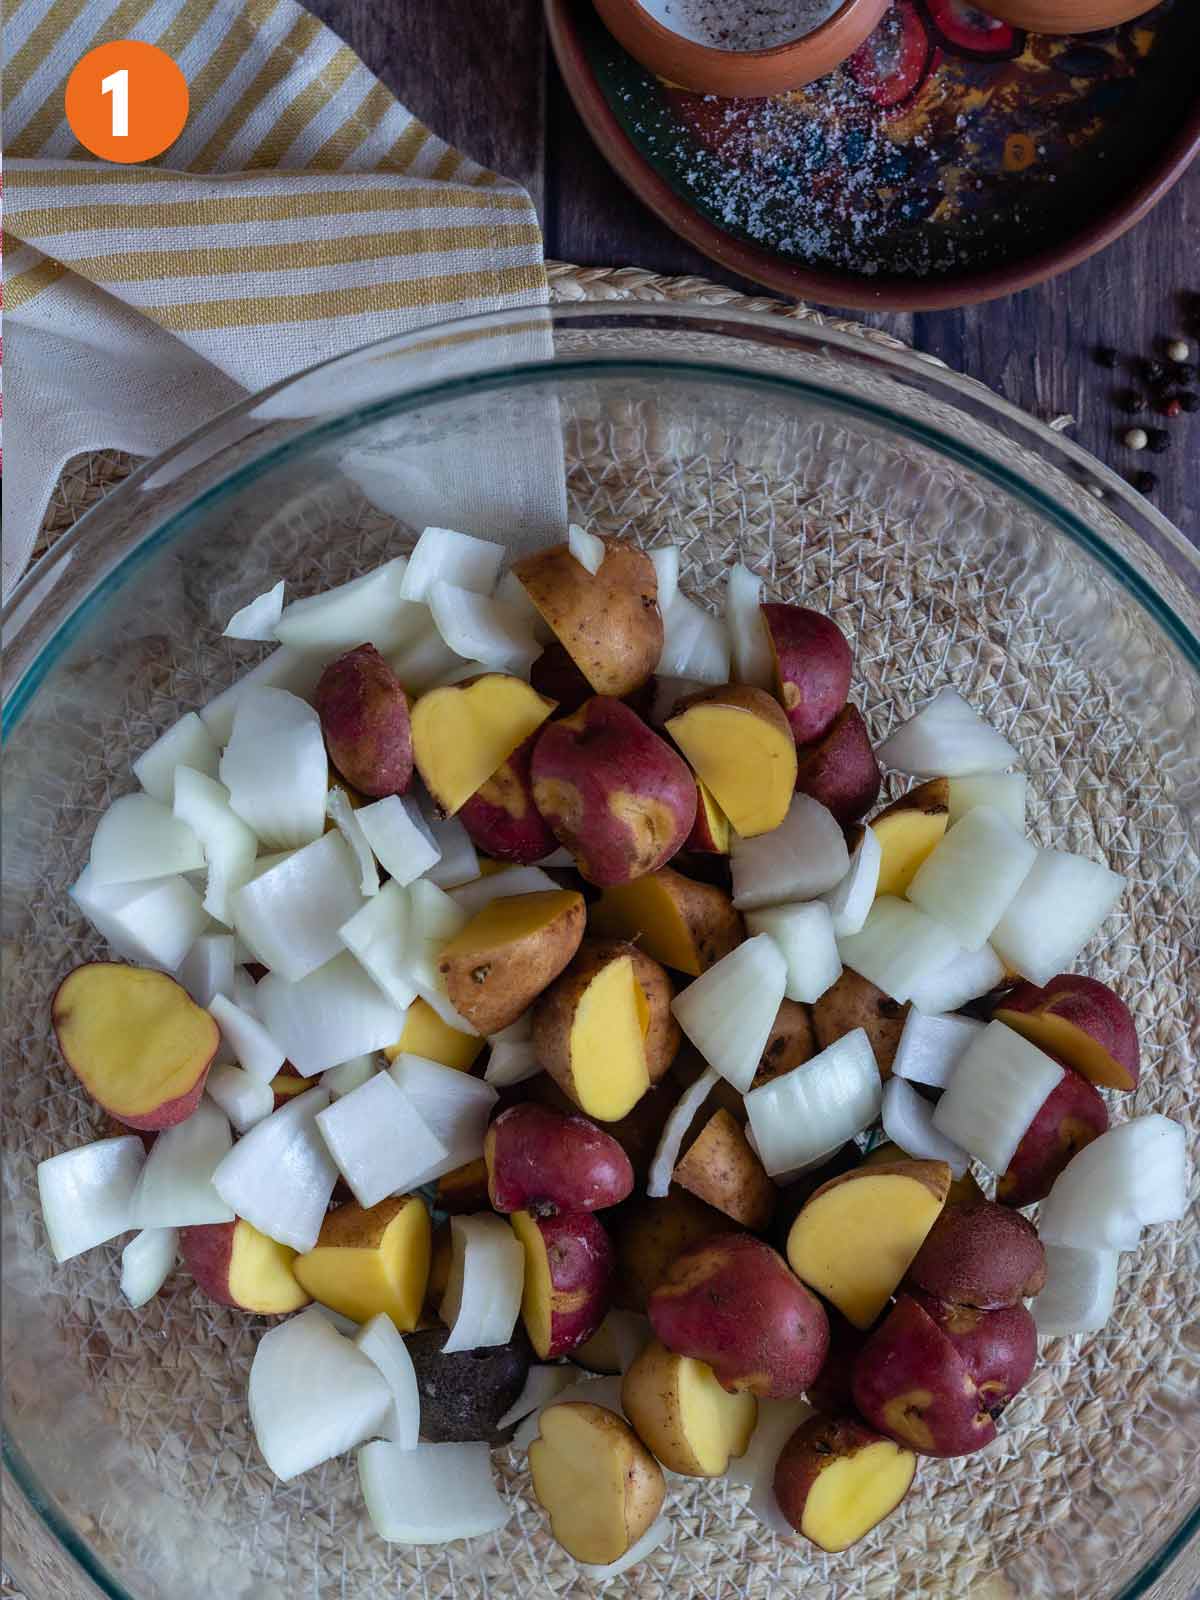 Potatoes and onions in a bowl.